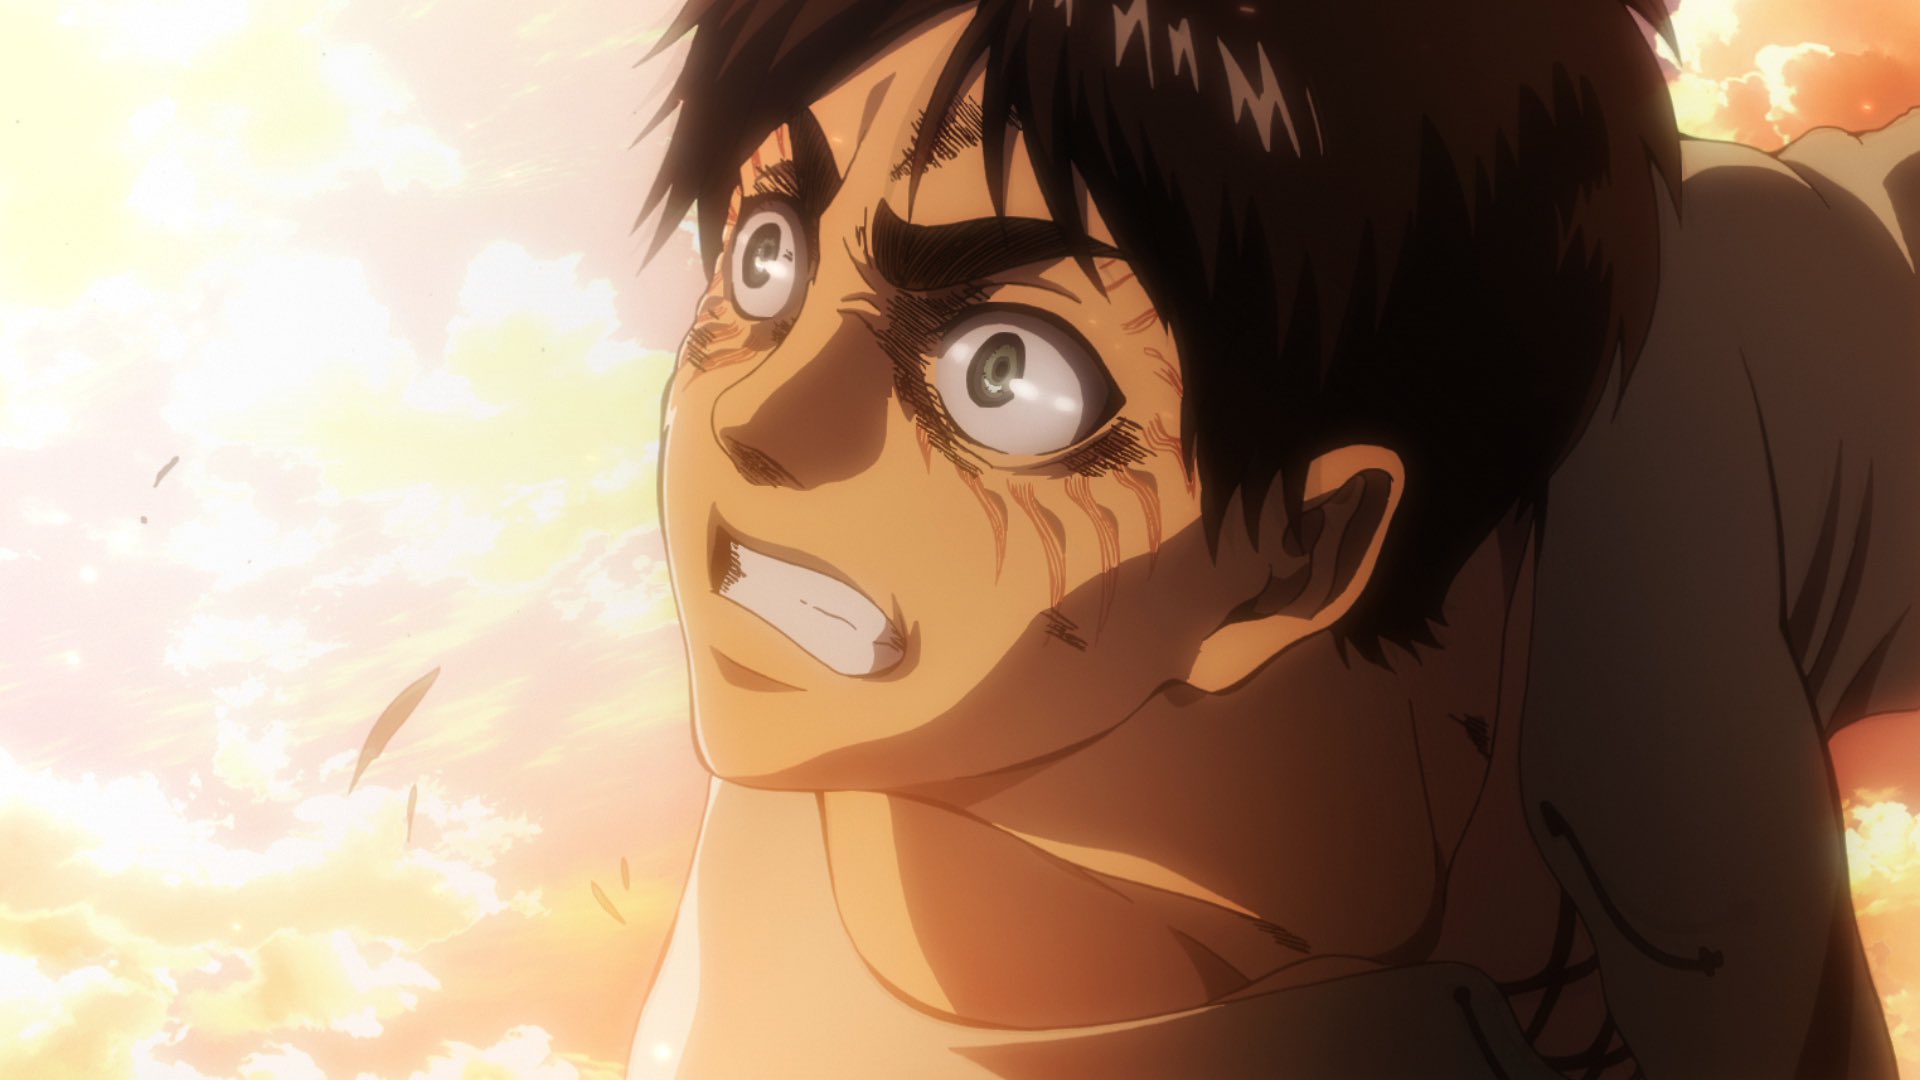 It has already been 1 Week since - Attack on Titan Wiki